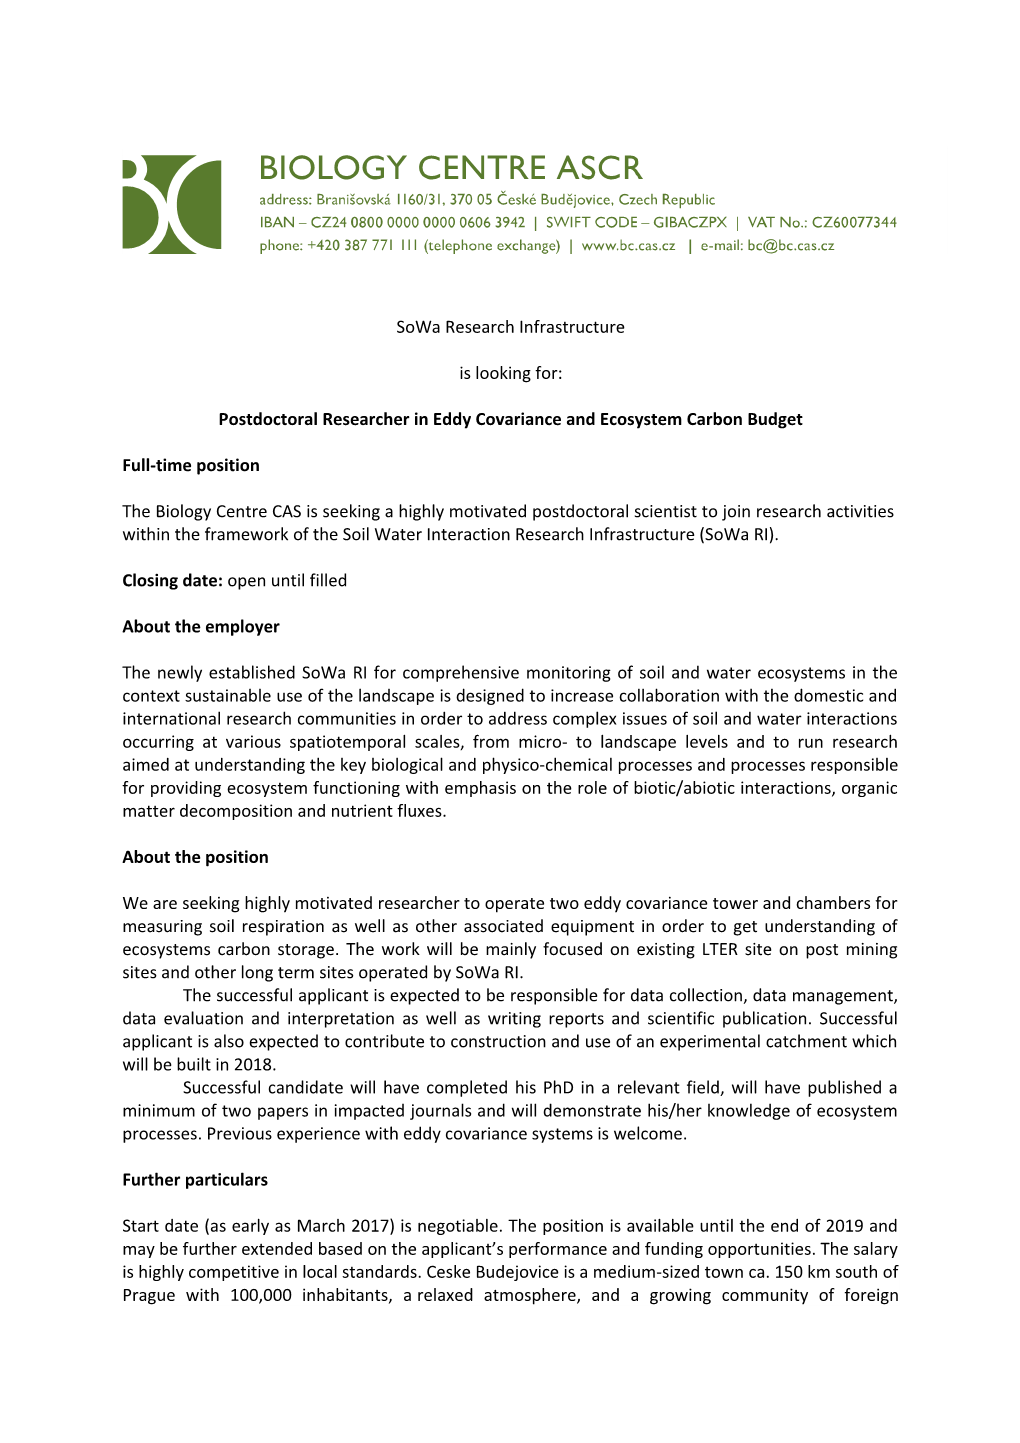 Postdoctoral Researcher in Eddy Covariance and Ecosystem Carbonbudget